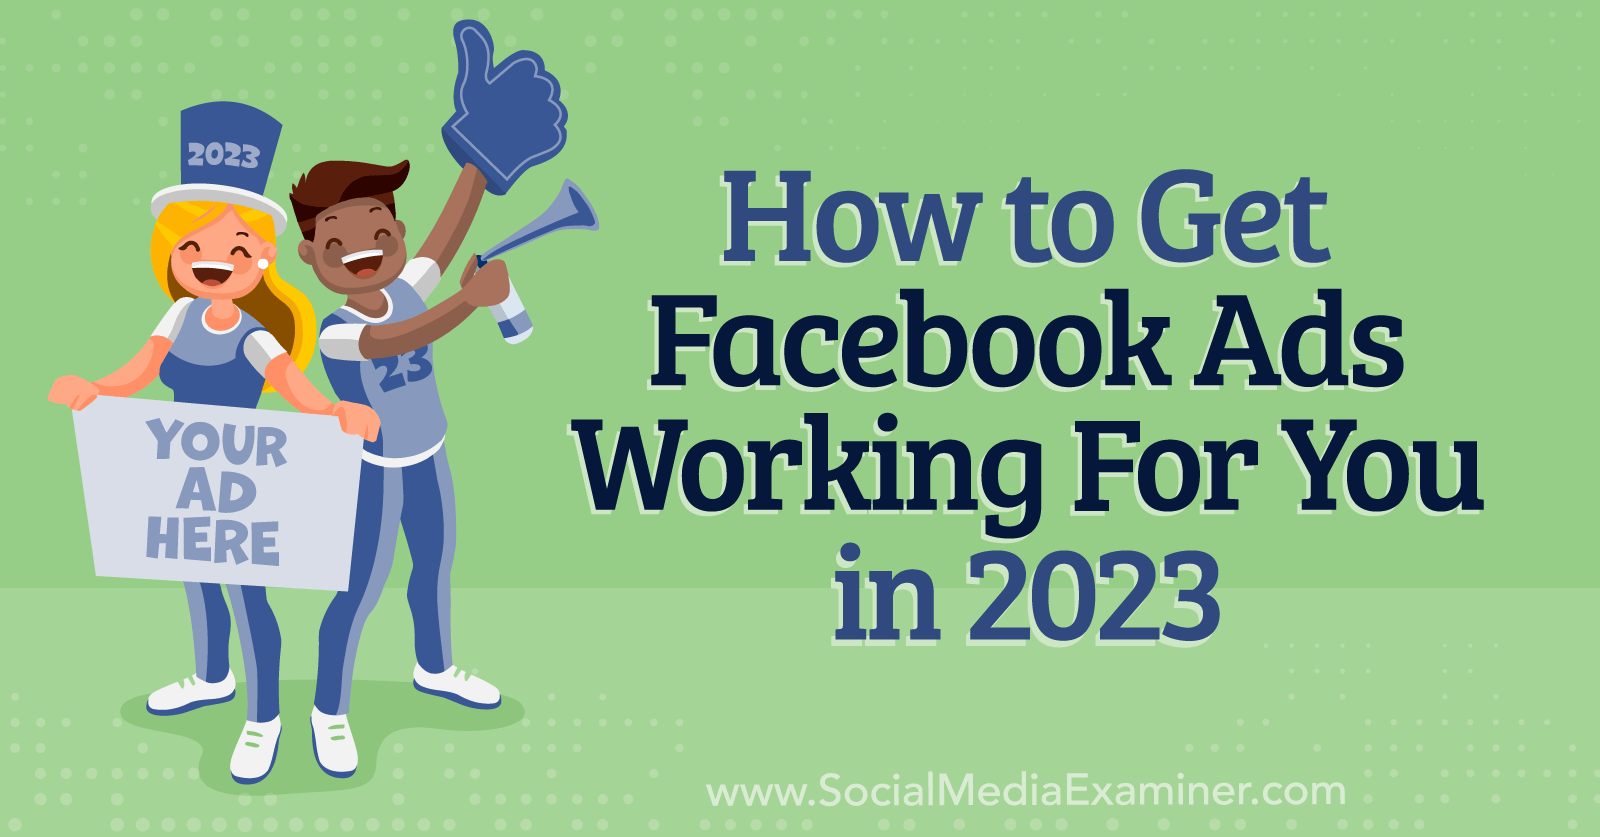 How to Get Facebook Ads Working for You in 2023 Social Media Examiner